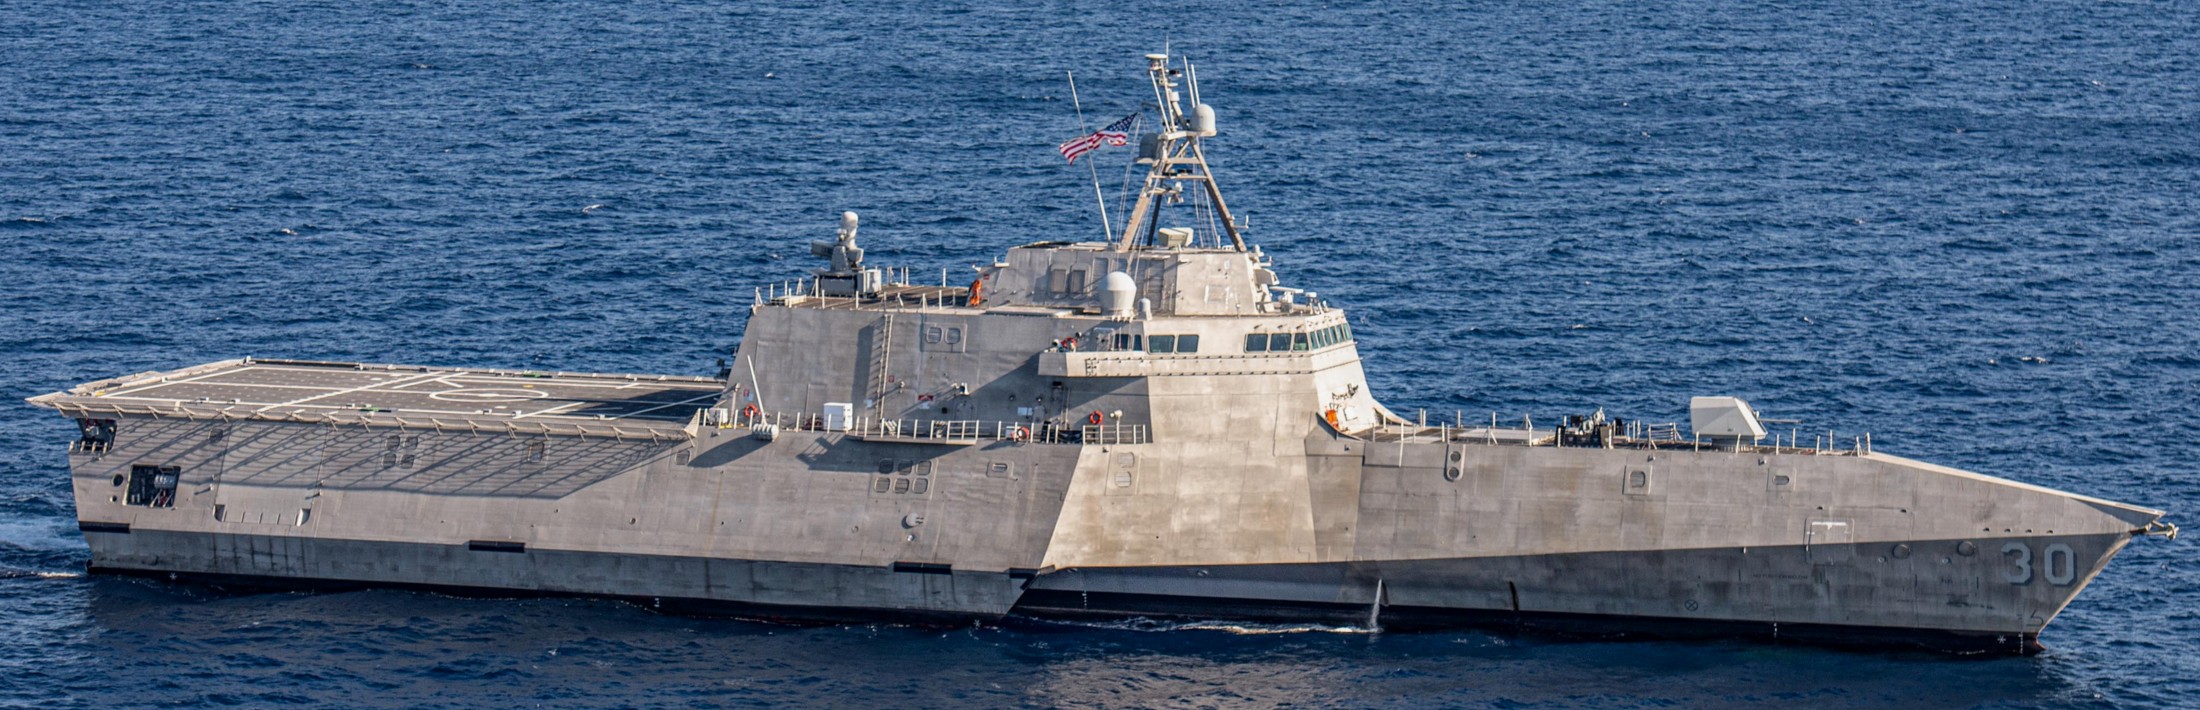 lcs-30 uss canberra littoral combat ship independence class us navy 23